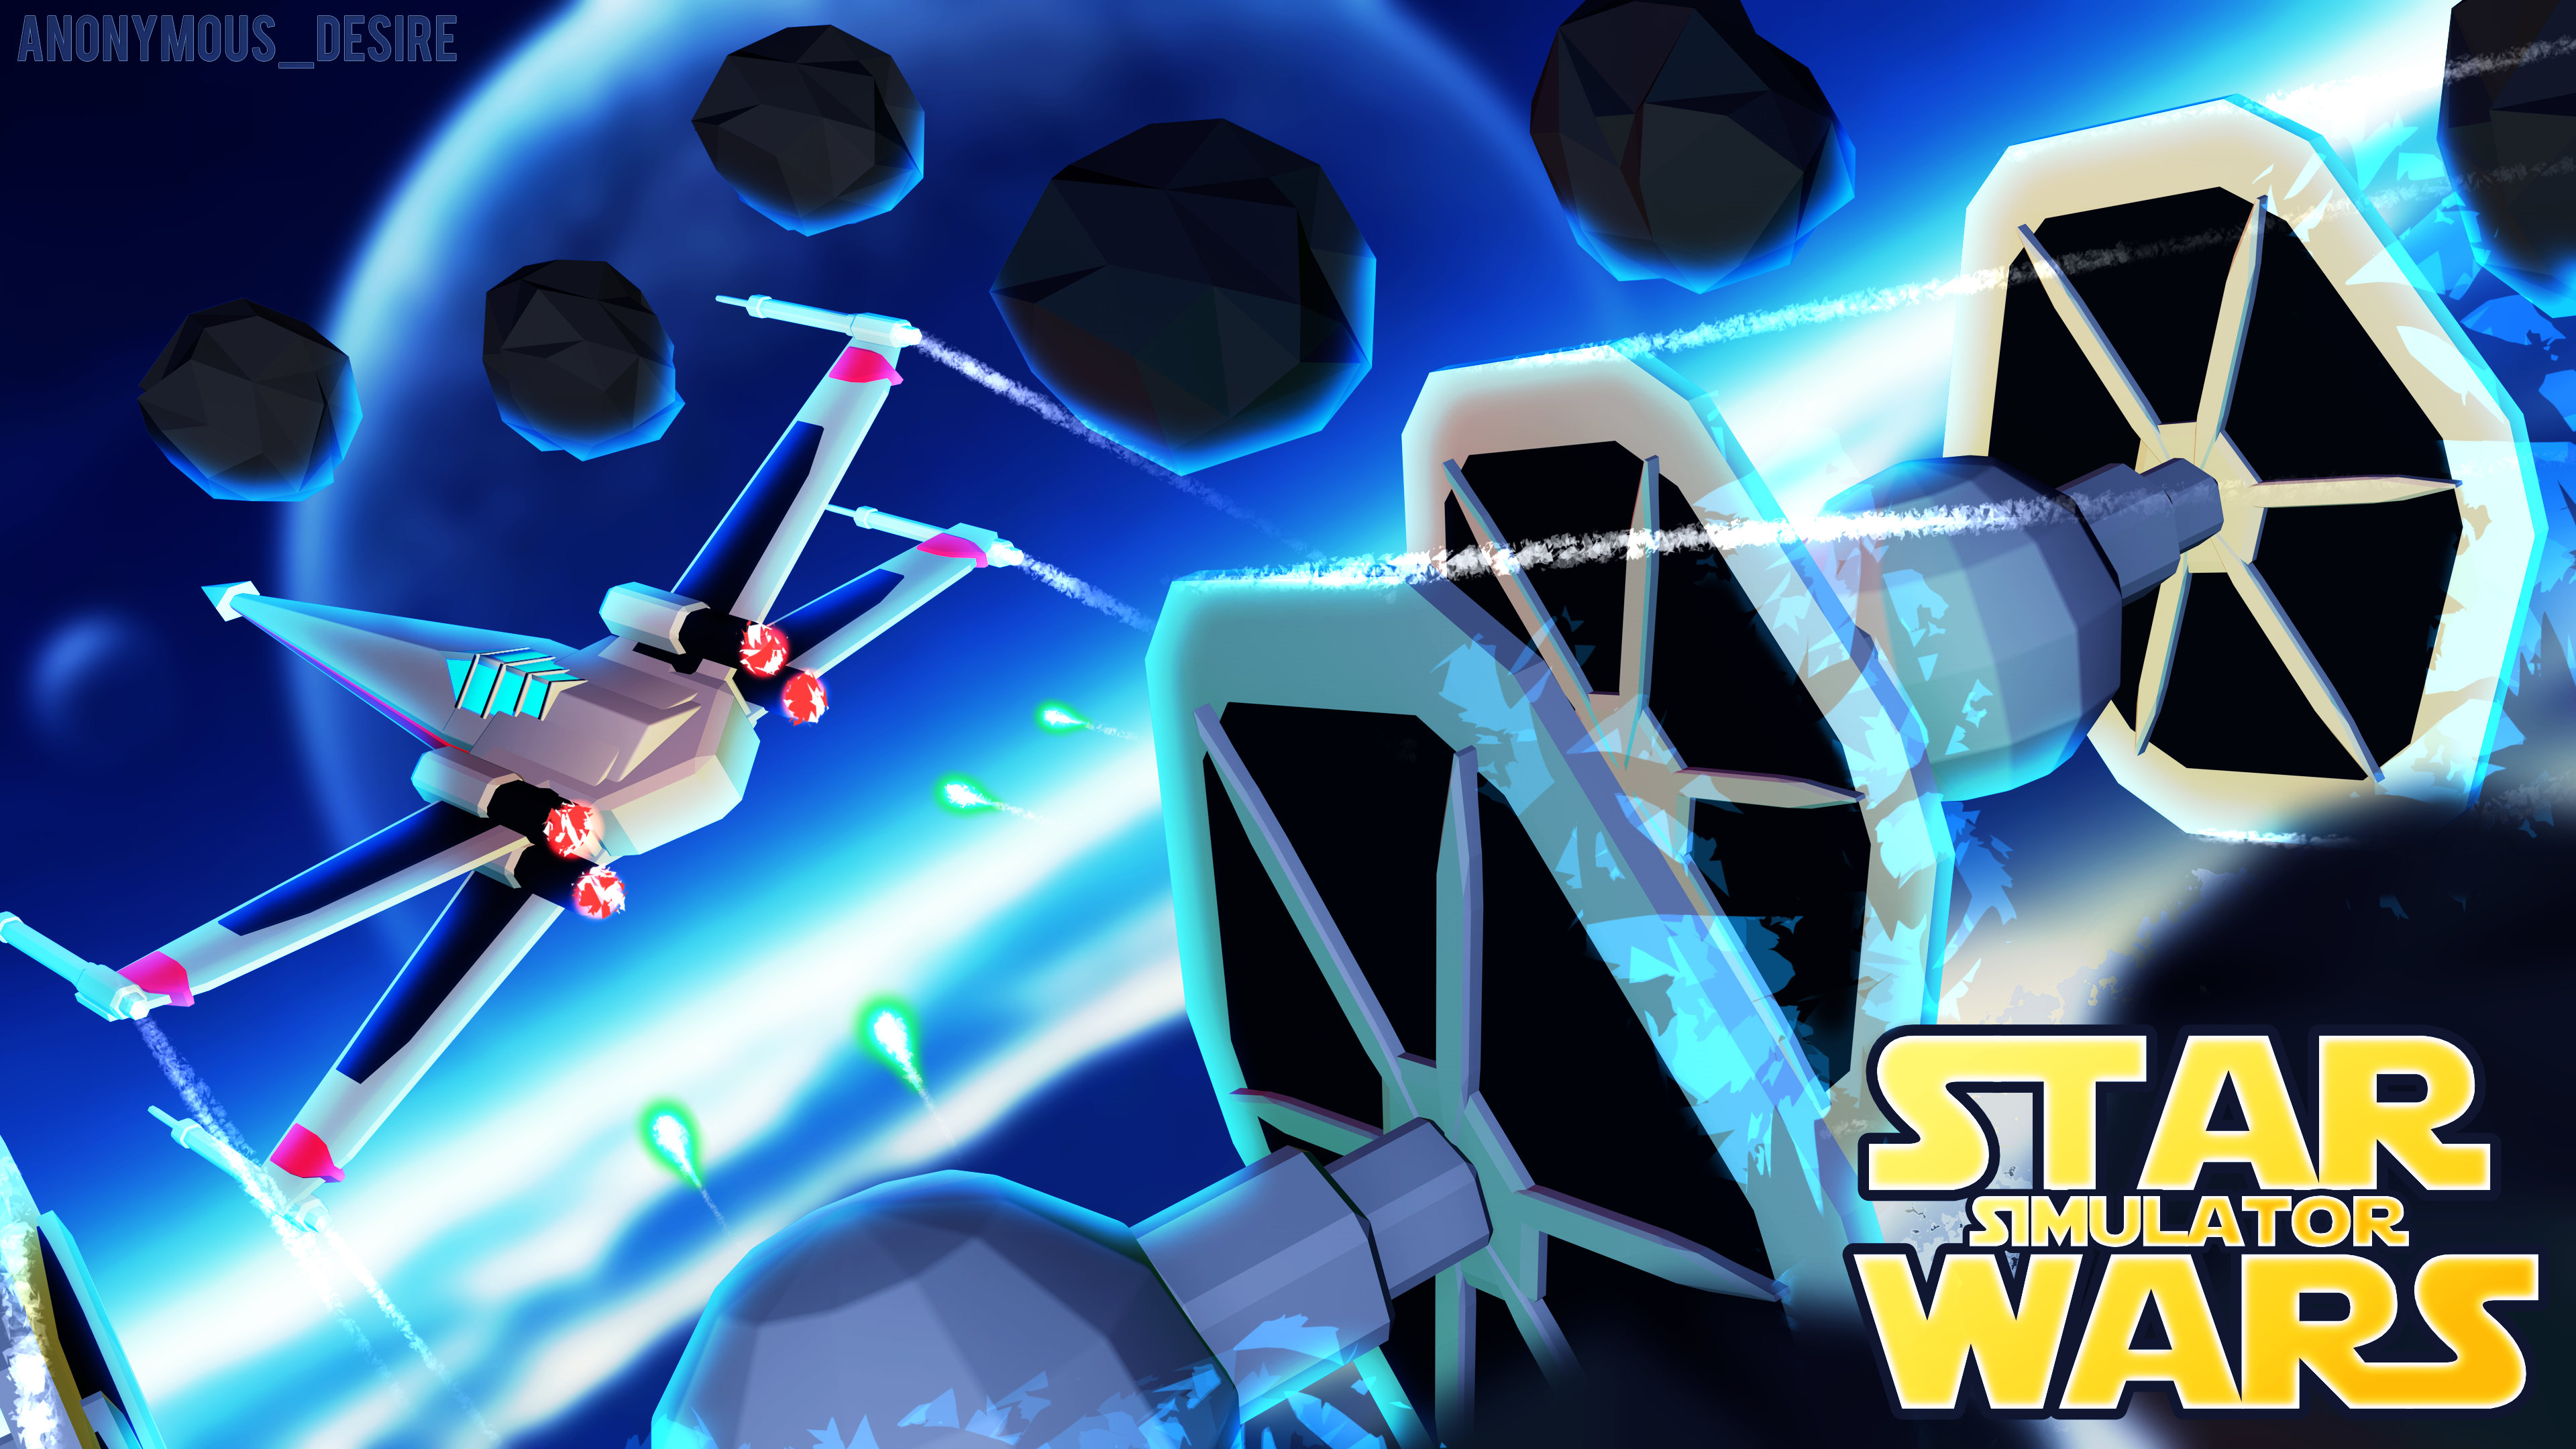 Star Wars Space Battle Roblox By Anonymousdesirerblx On Deviantart - roblox space battle games